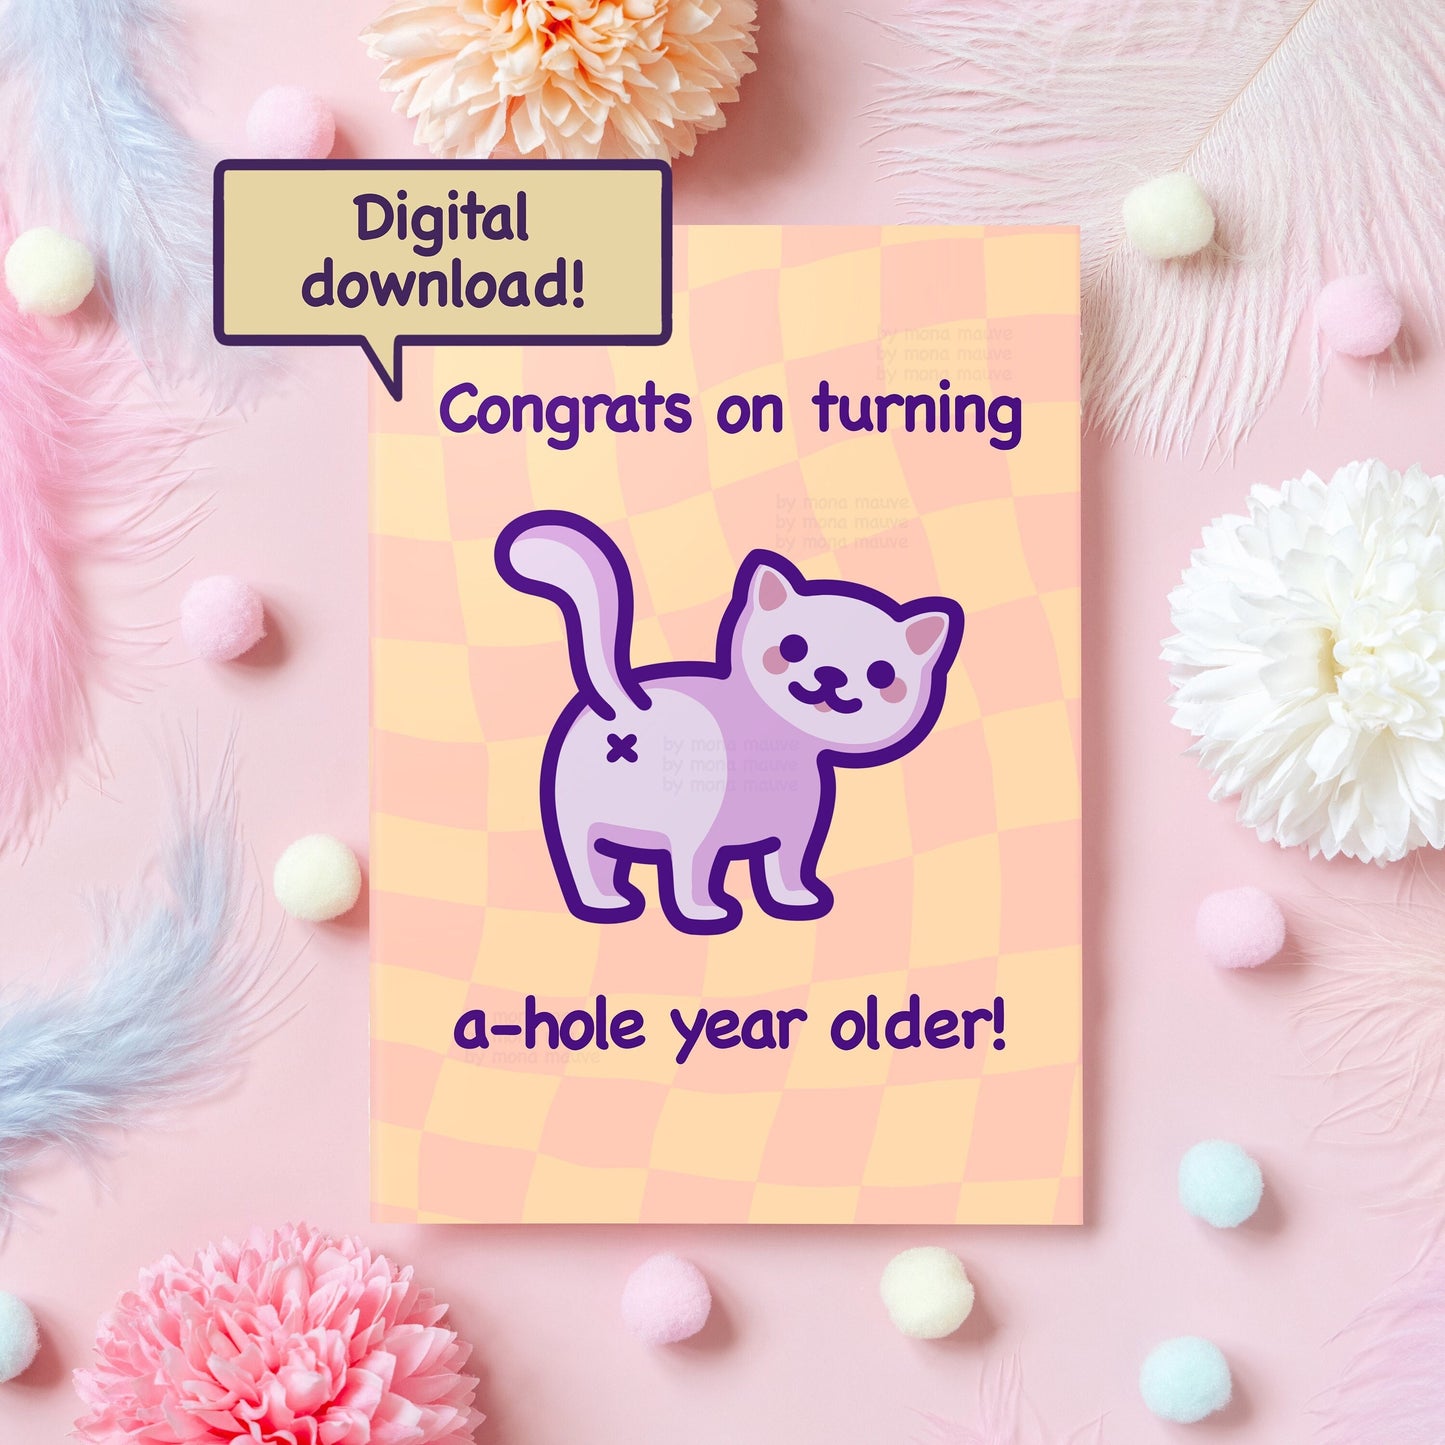 Printable Funny Cat Birthday Card | A-hole Year Older! | Digital Download | Funny Birthday Gift for Husband, Wife, Friend - Her or Him